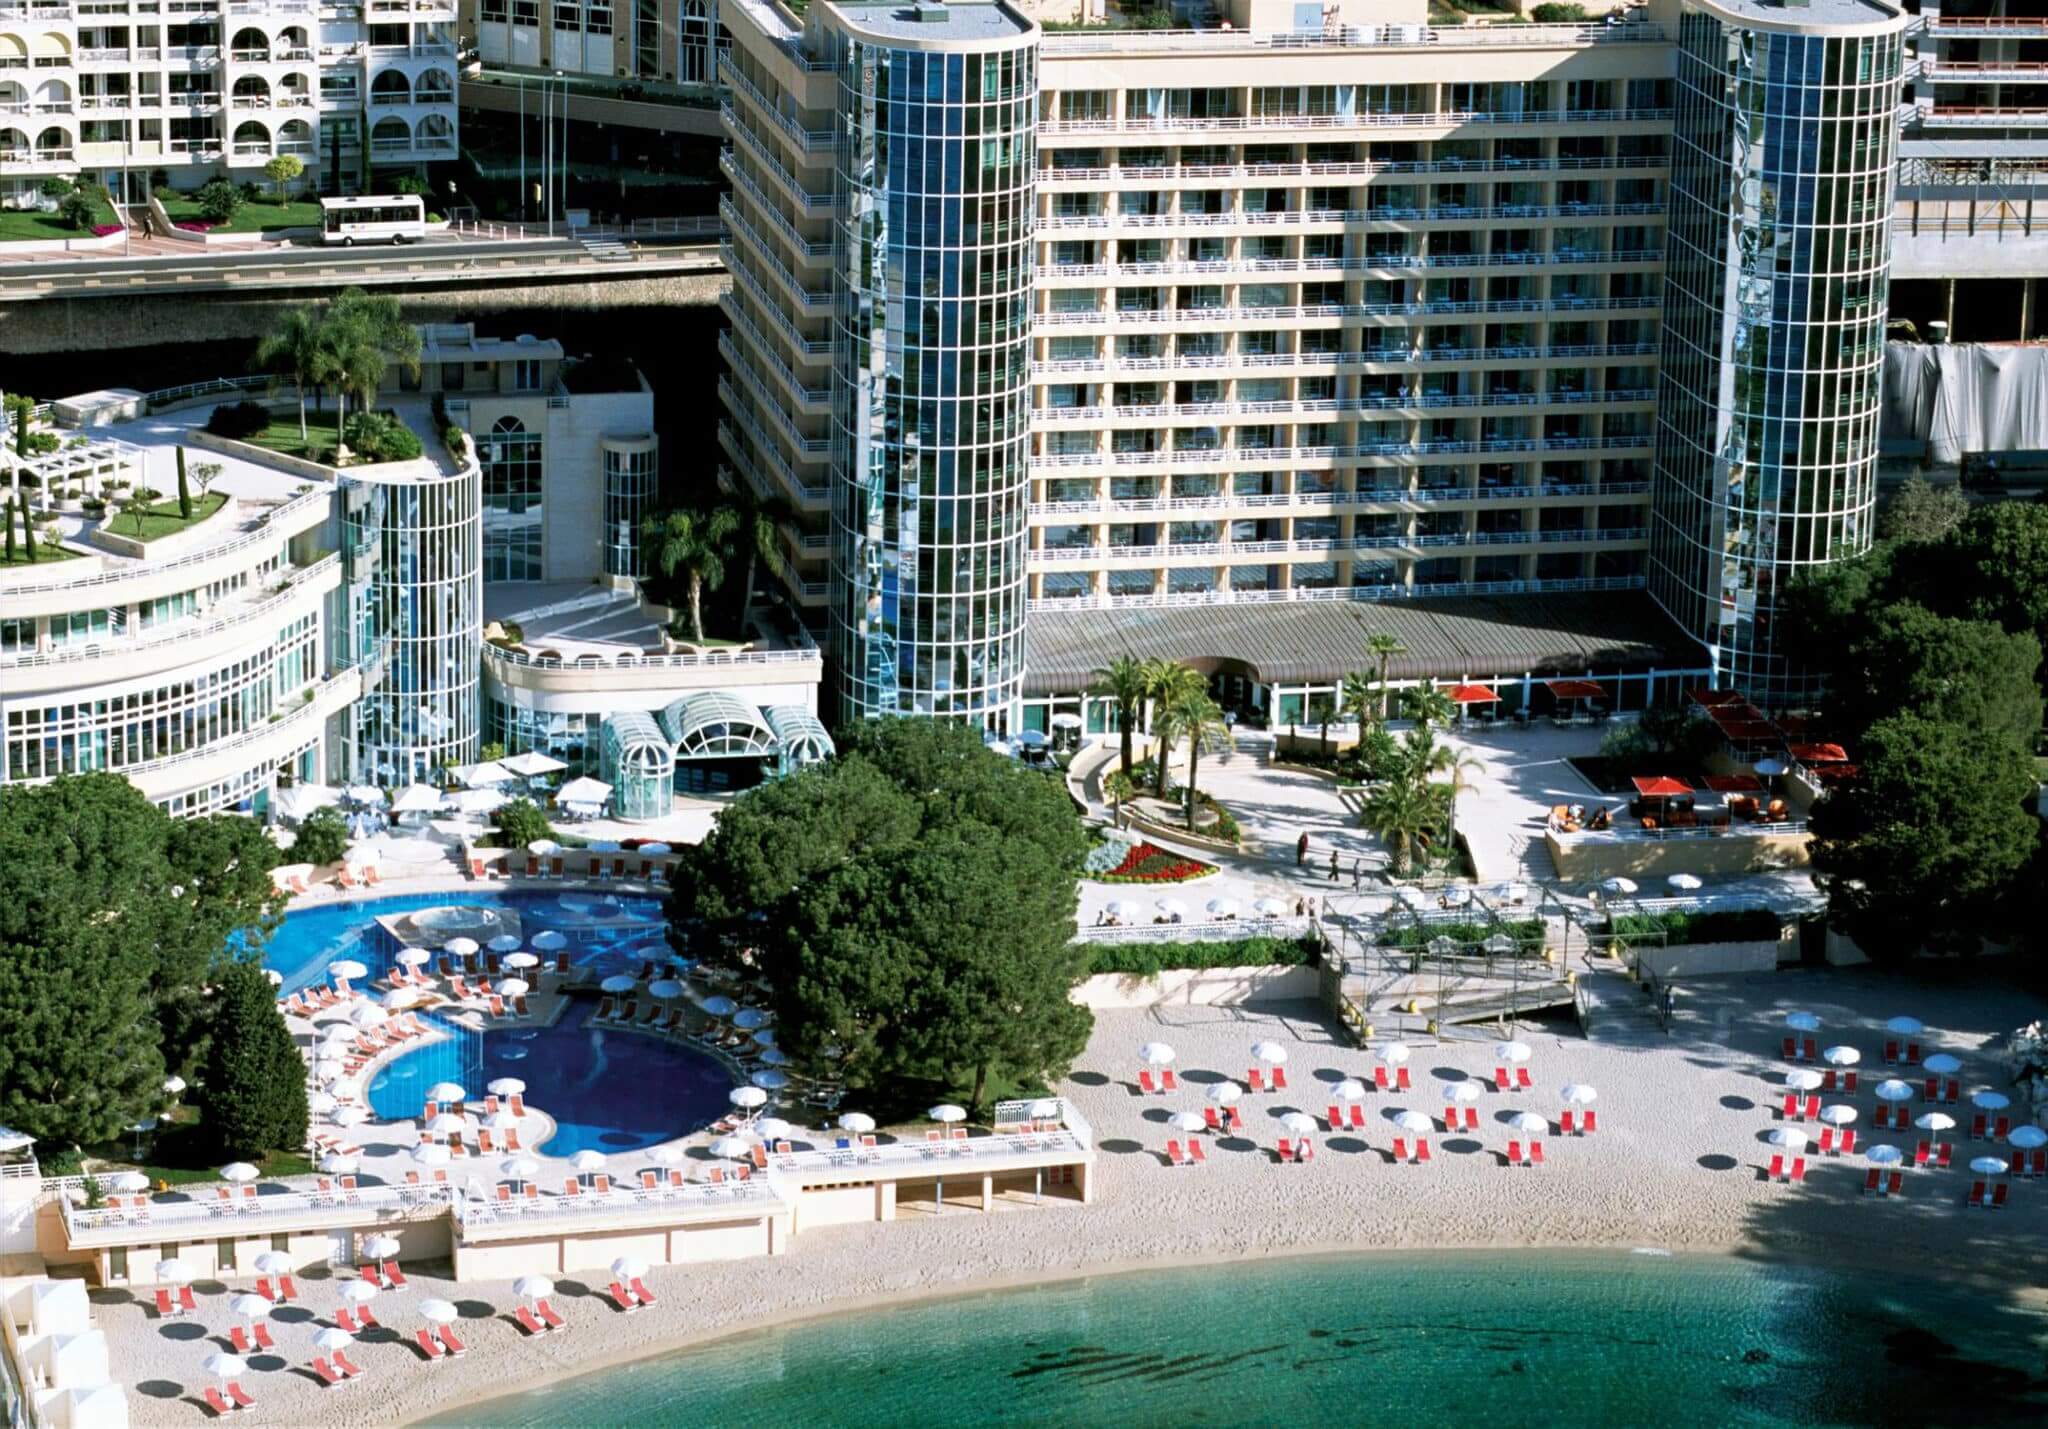 Image of the Merdien hotel from above, on the beach from above